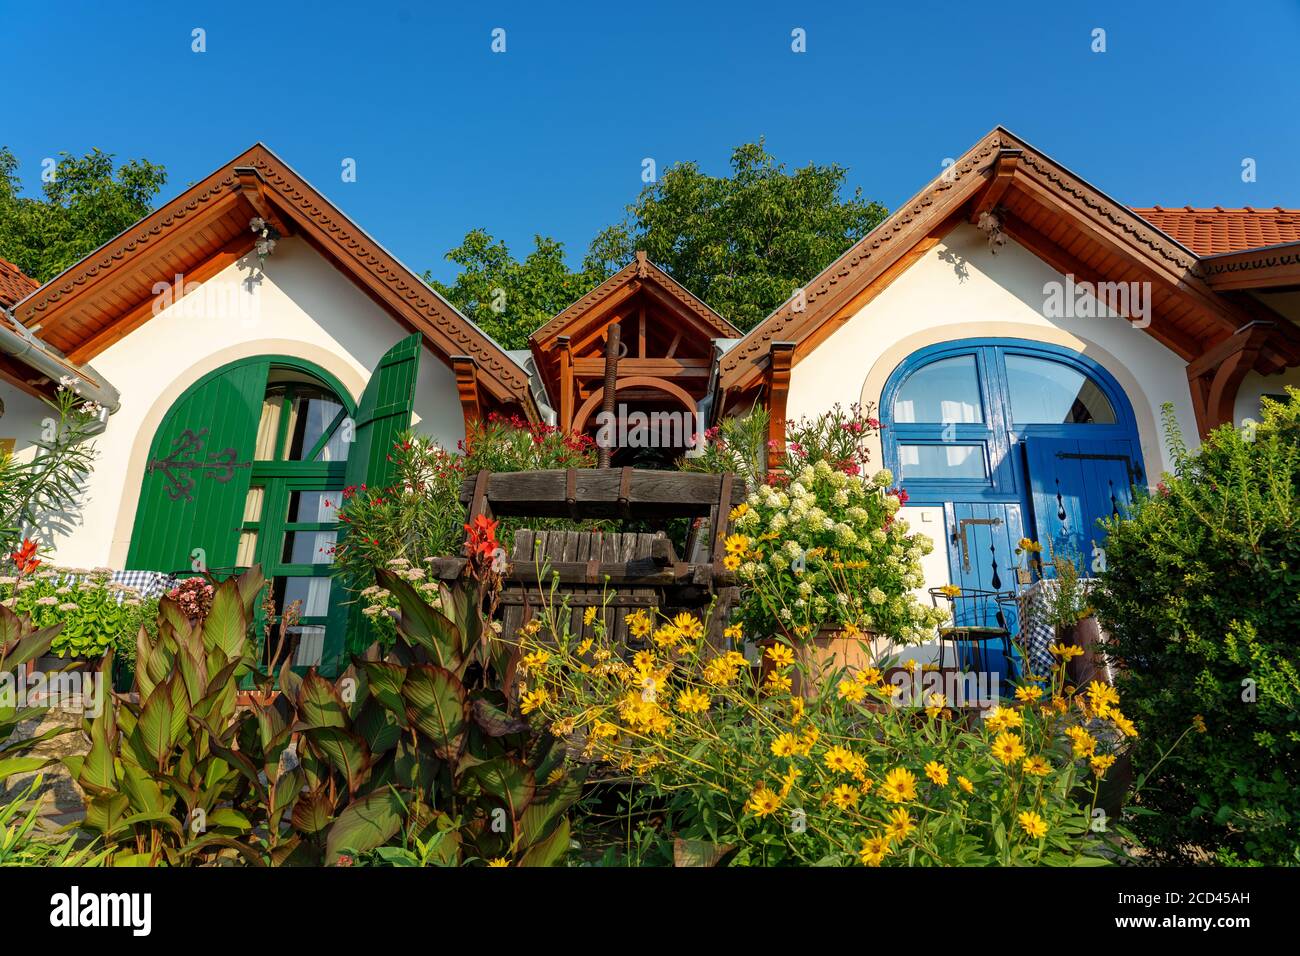 Colorful press-houses little dwarfhouses in pecs Hungary with many flowers Stock Photo